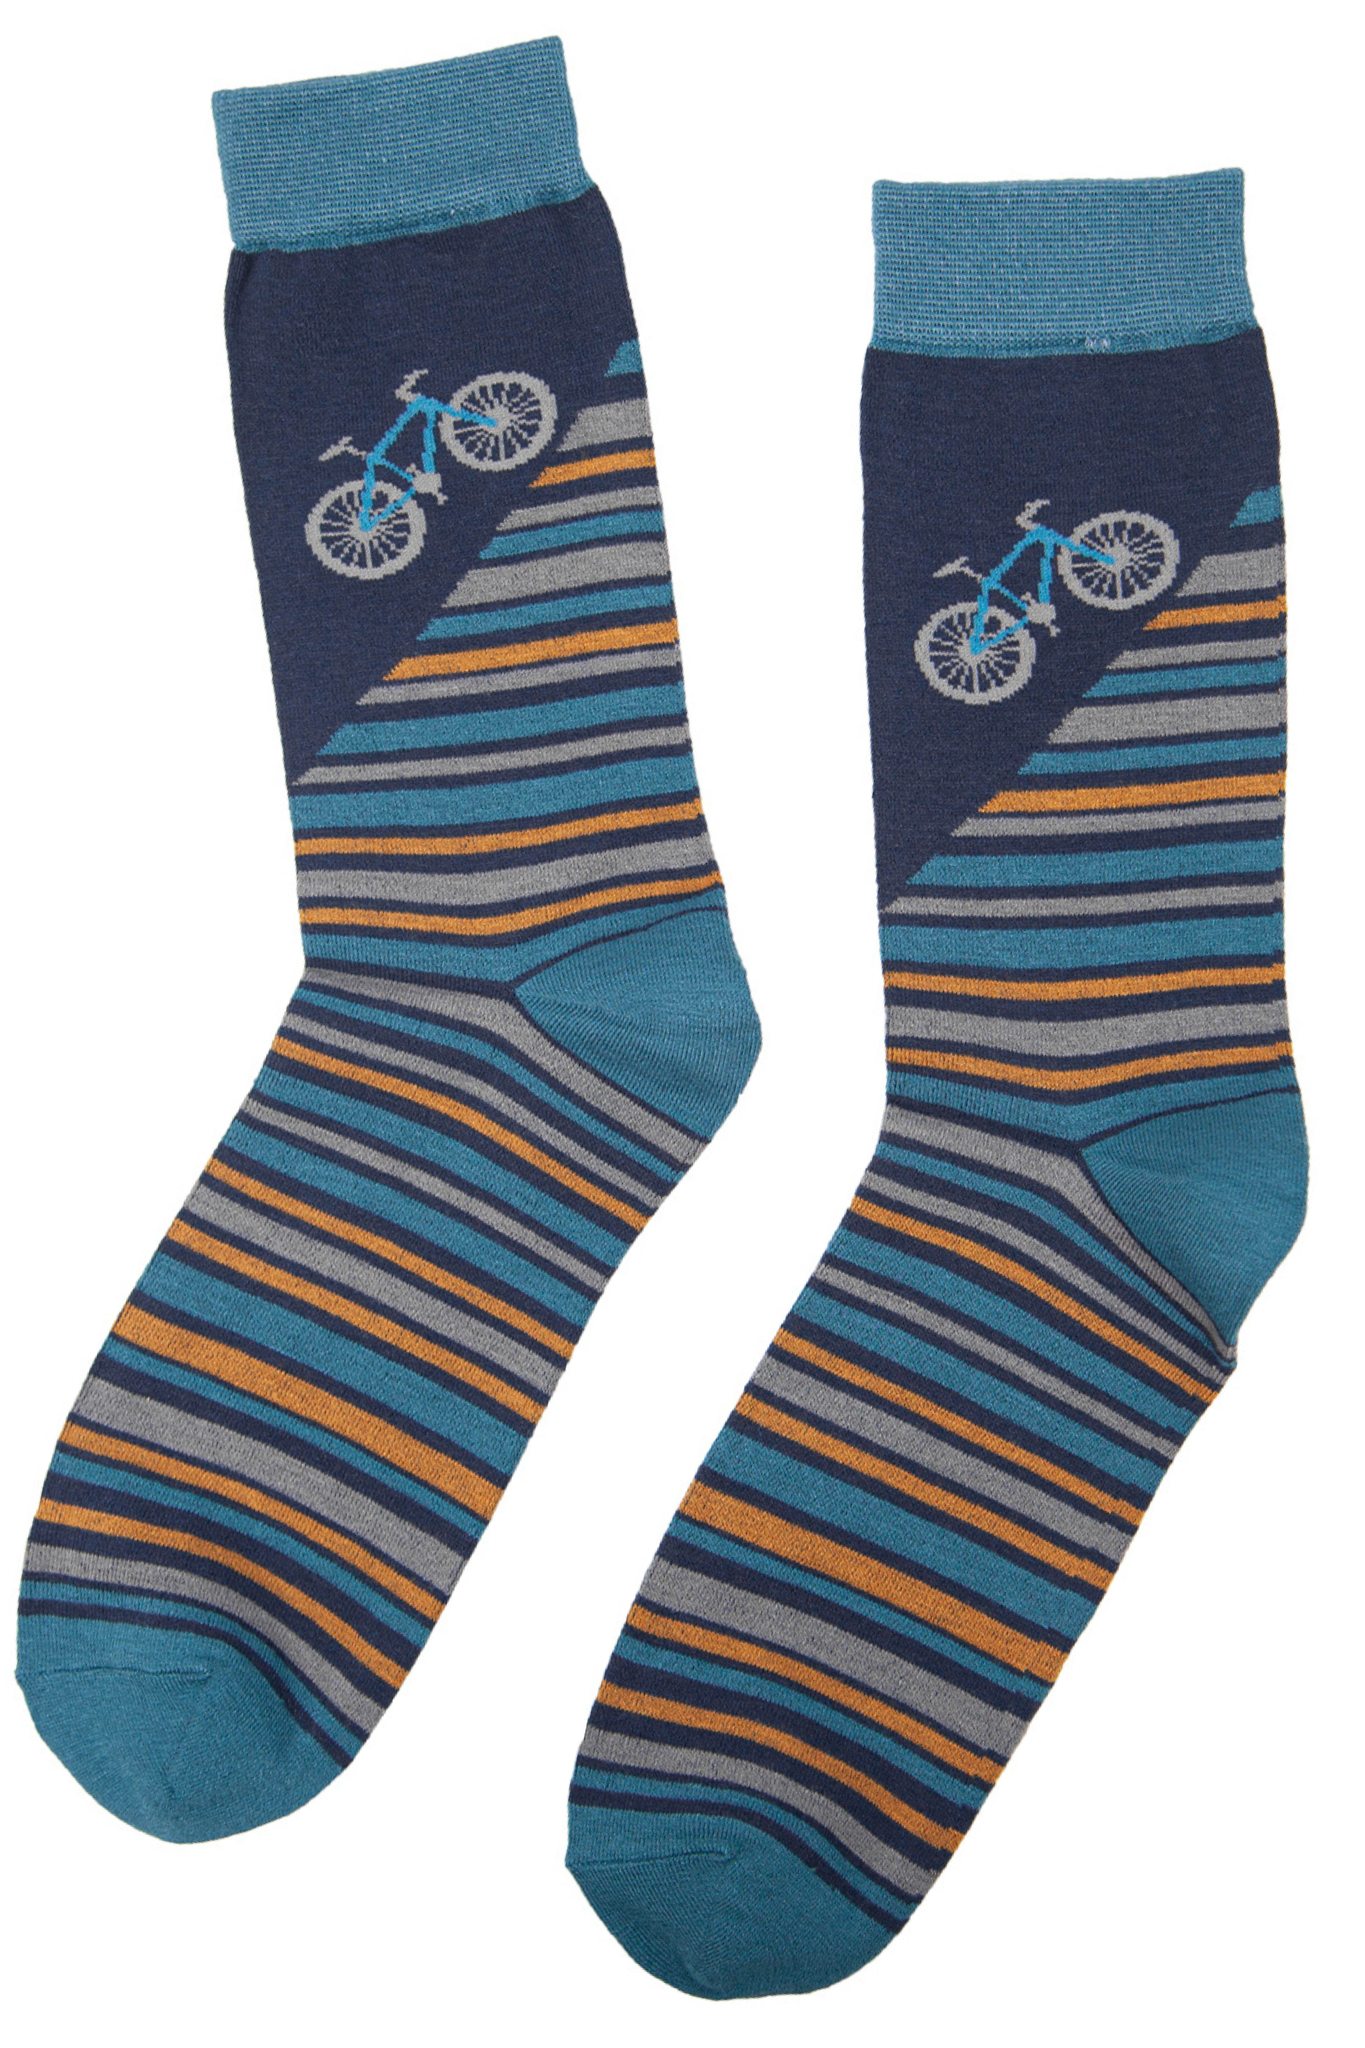 blue and yellow striped dress socks with a mountain bike on the ankle